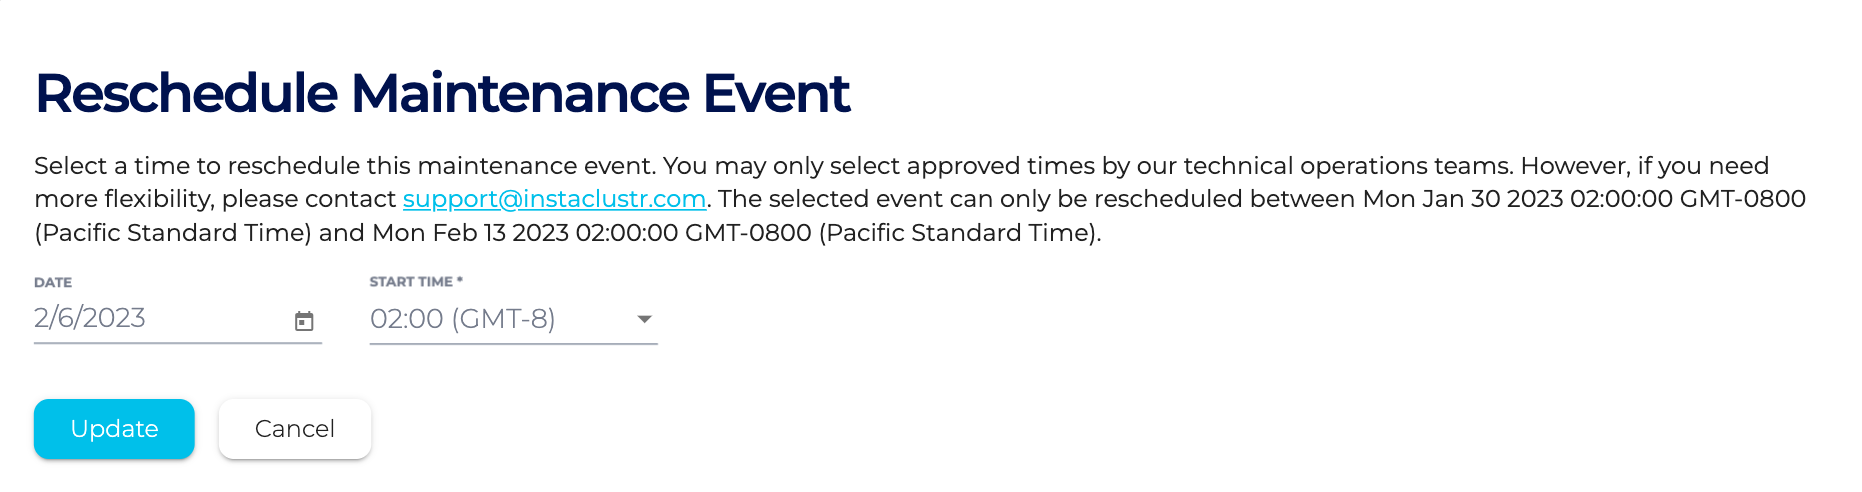 Select a date and time for when you want the maintenance event to be rescheduled